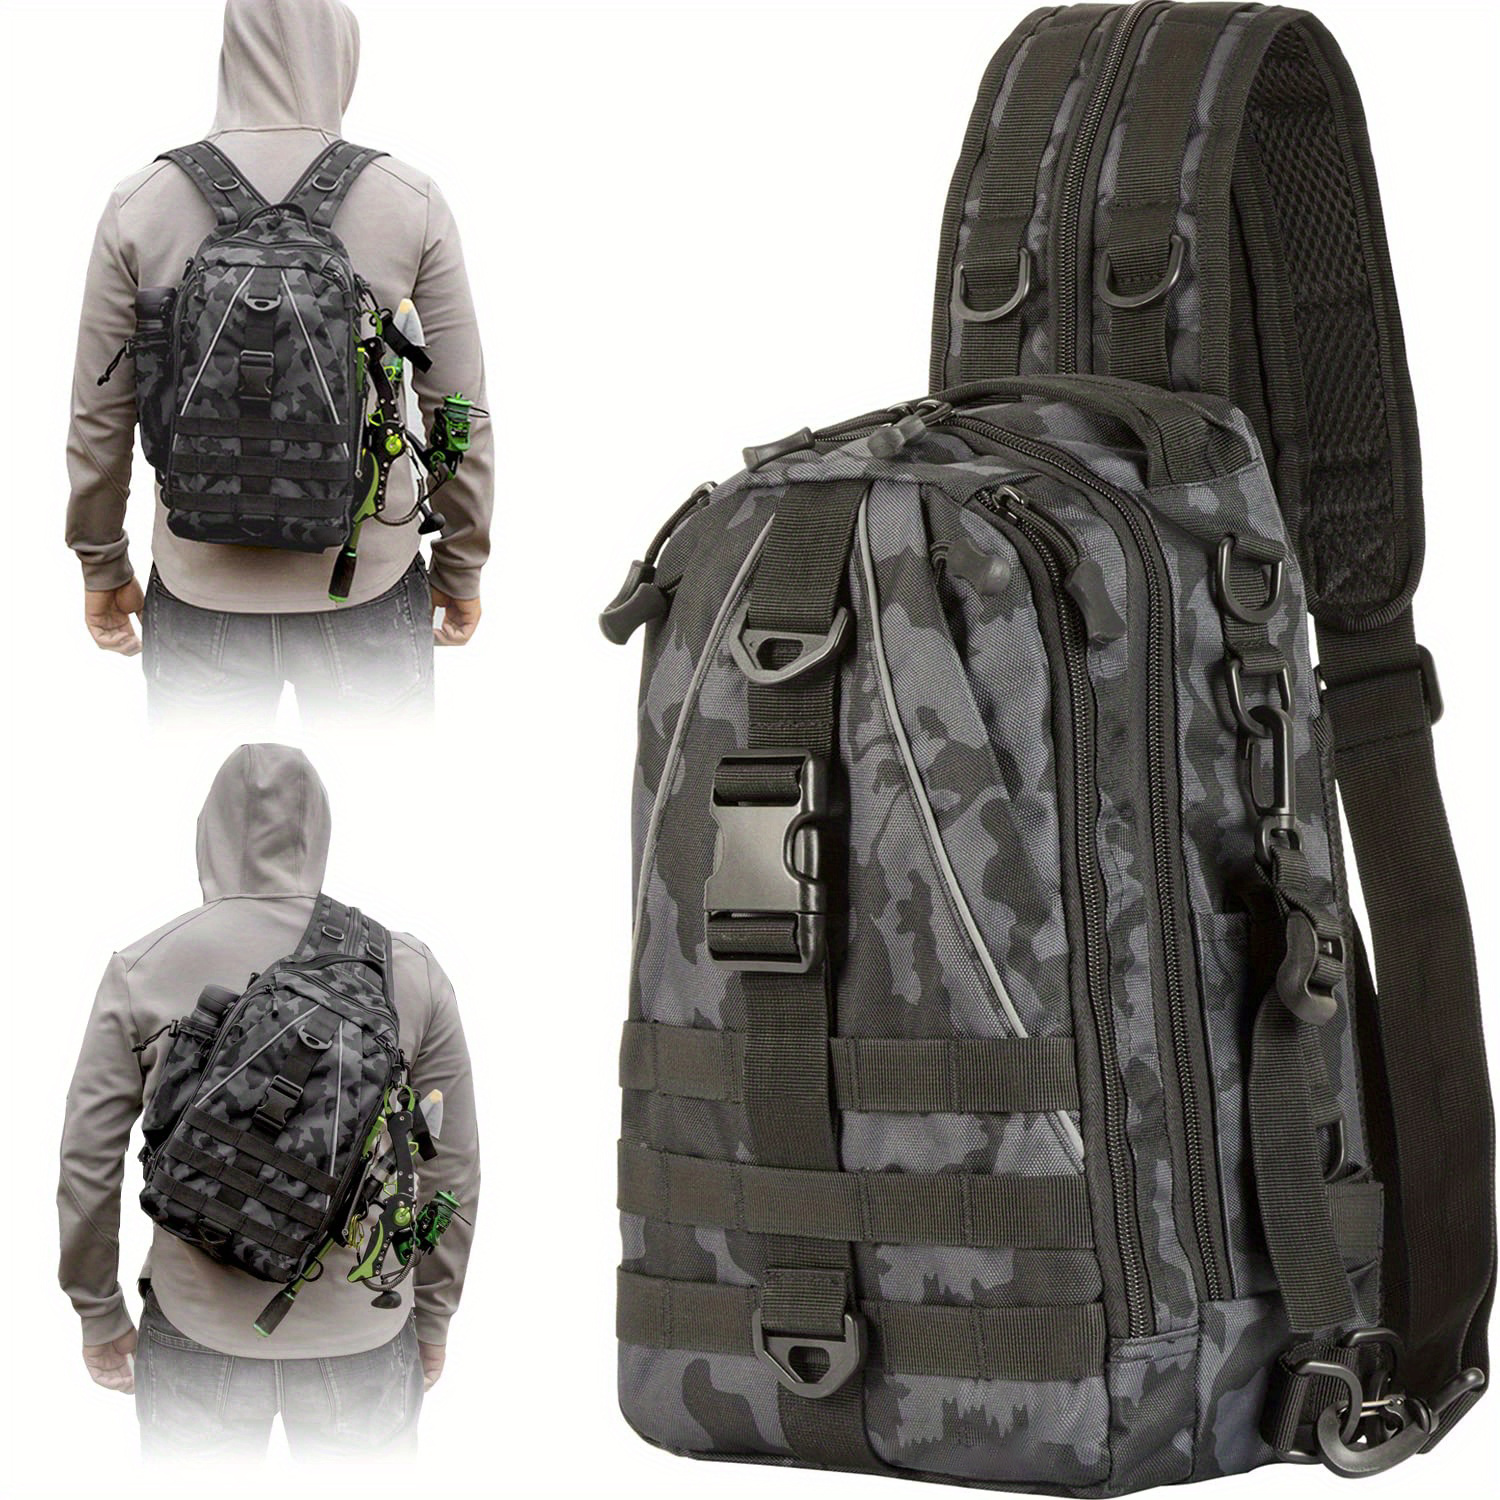 Upgrade Fishing Game Assorted color Fishing Backpack Tackle